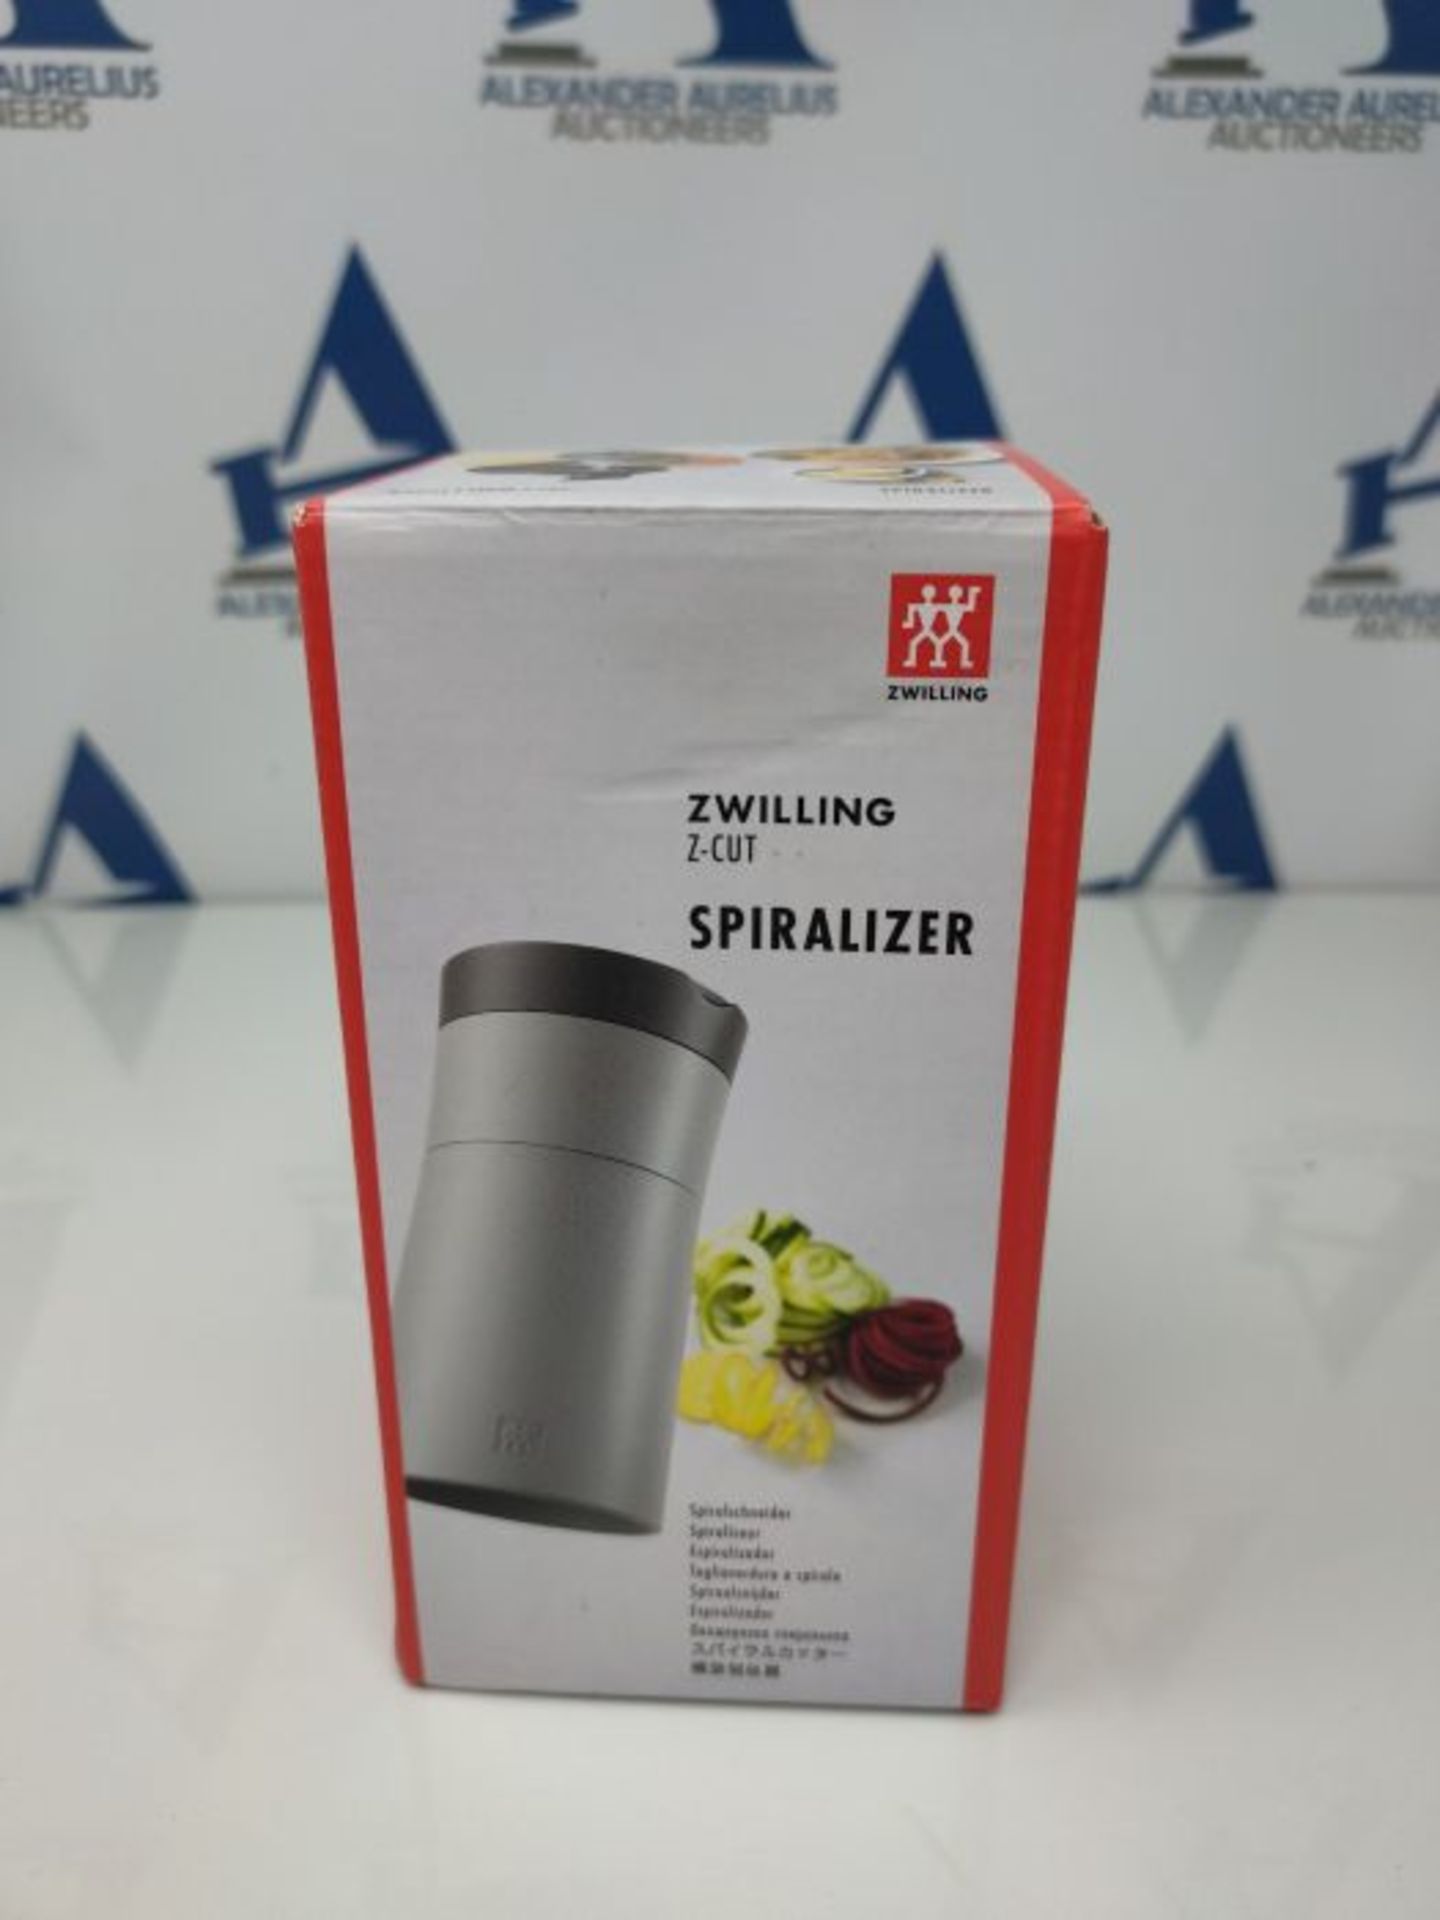 ZWILLING Z-Cut Stainless Steel Spiral Cutter, Multifunctional, Plastic Housing, Grey - Image 2 of 6